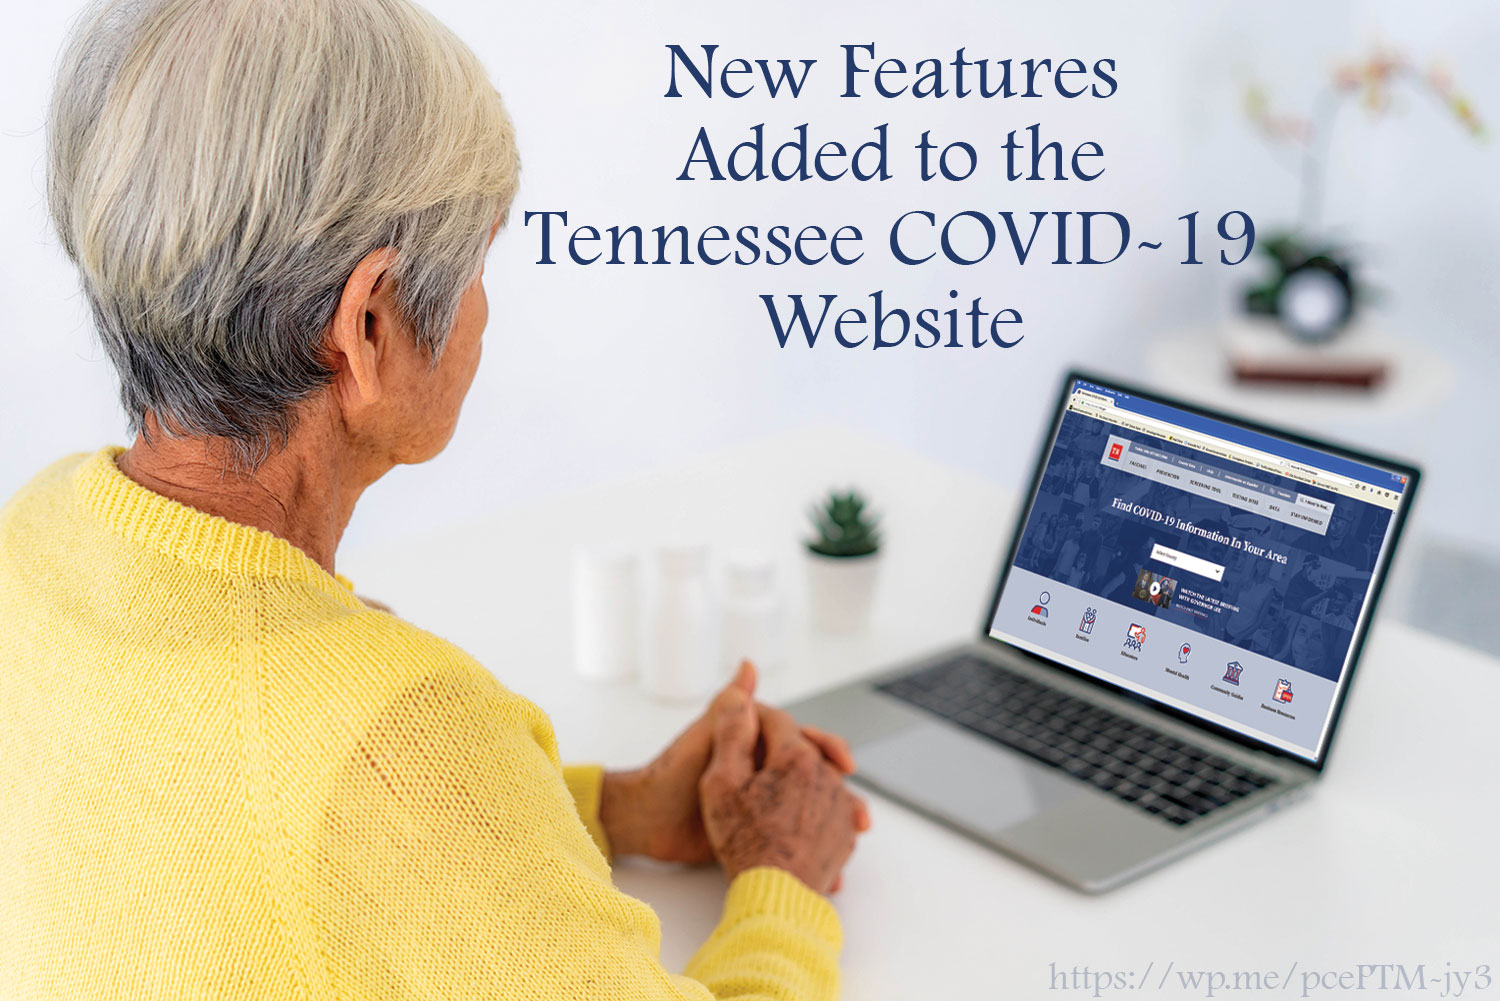 The COVID19.tn.gov website provides a simple tool for Tennesseans to find their phase in Tennessee’s COVID-19 Vaccination Plan. Updates to this tool make it easier for eligible users to request a vaccination appointment with their county health department. Find the tool at https://covid19.tn.gov/covid-19-vaccines/eligibility/.